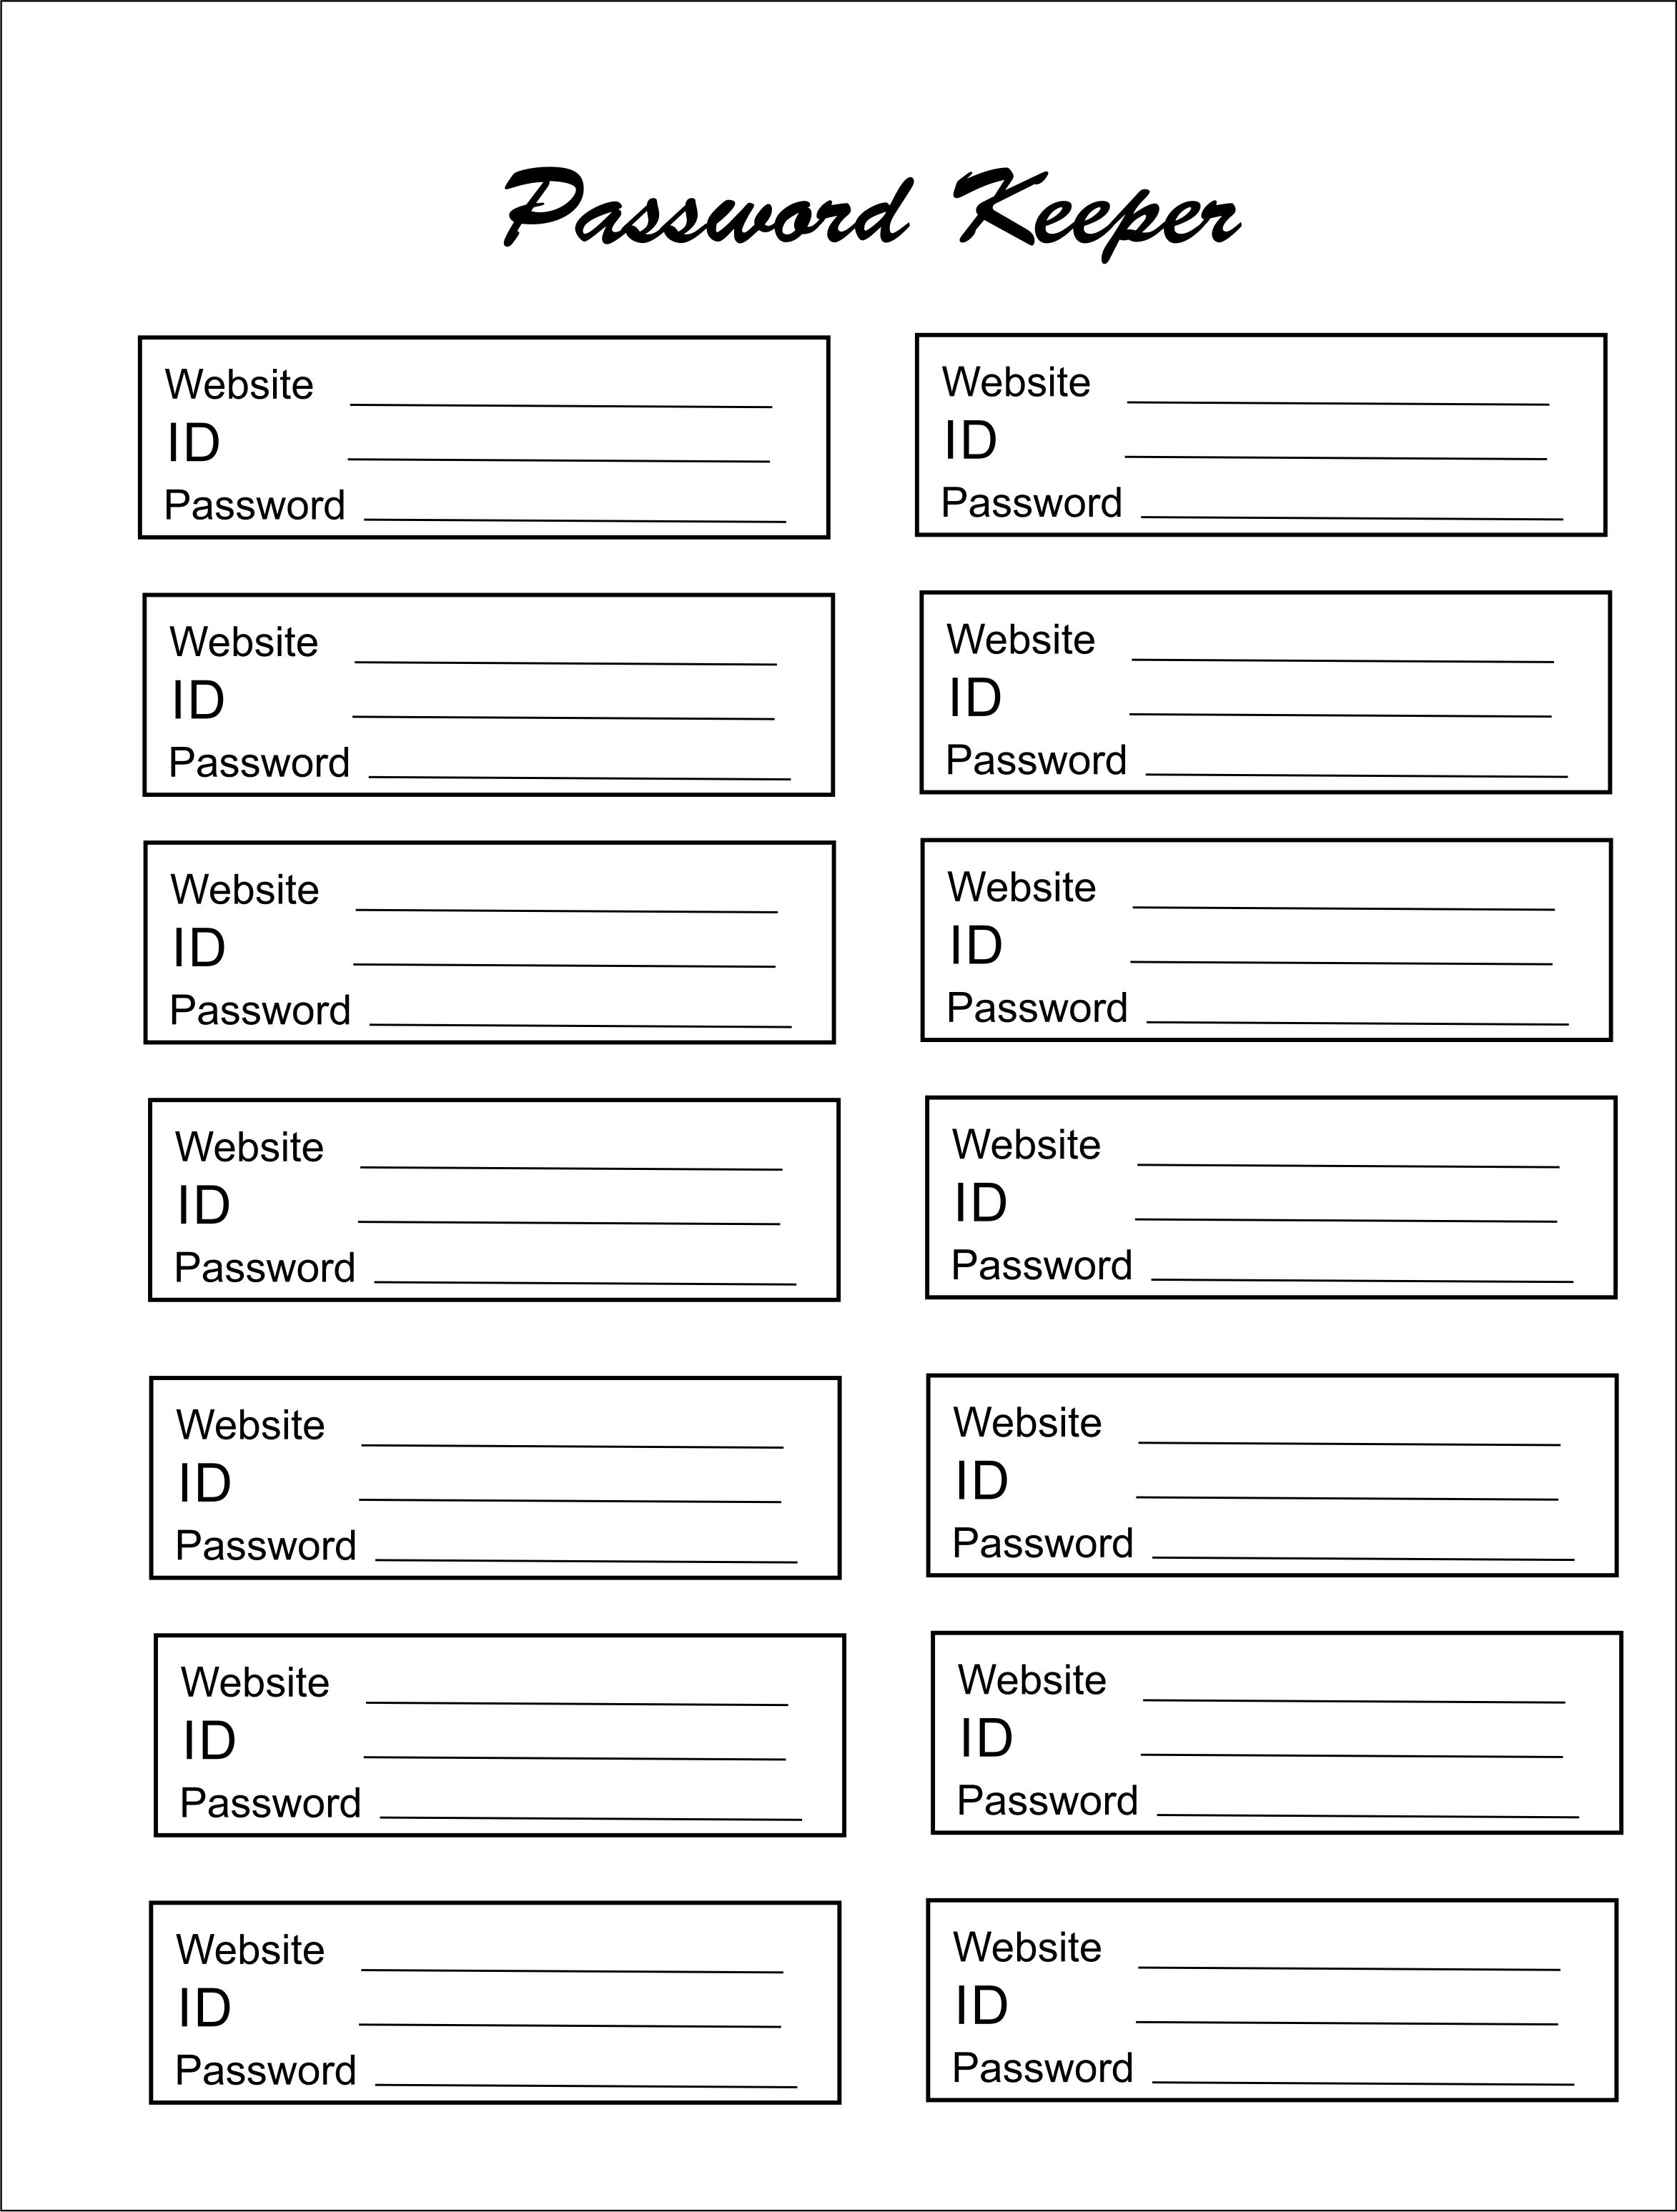 Printable Password Keeper | Room Surf intended for Free Printable Password Sheet